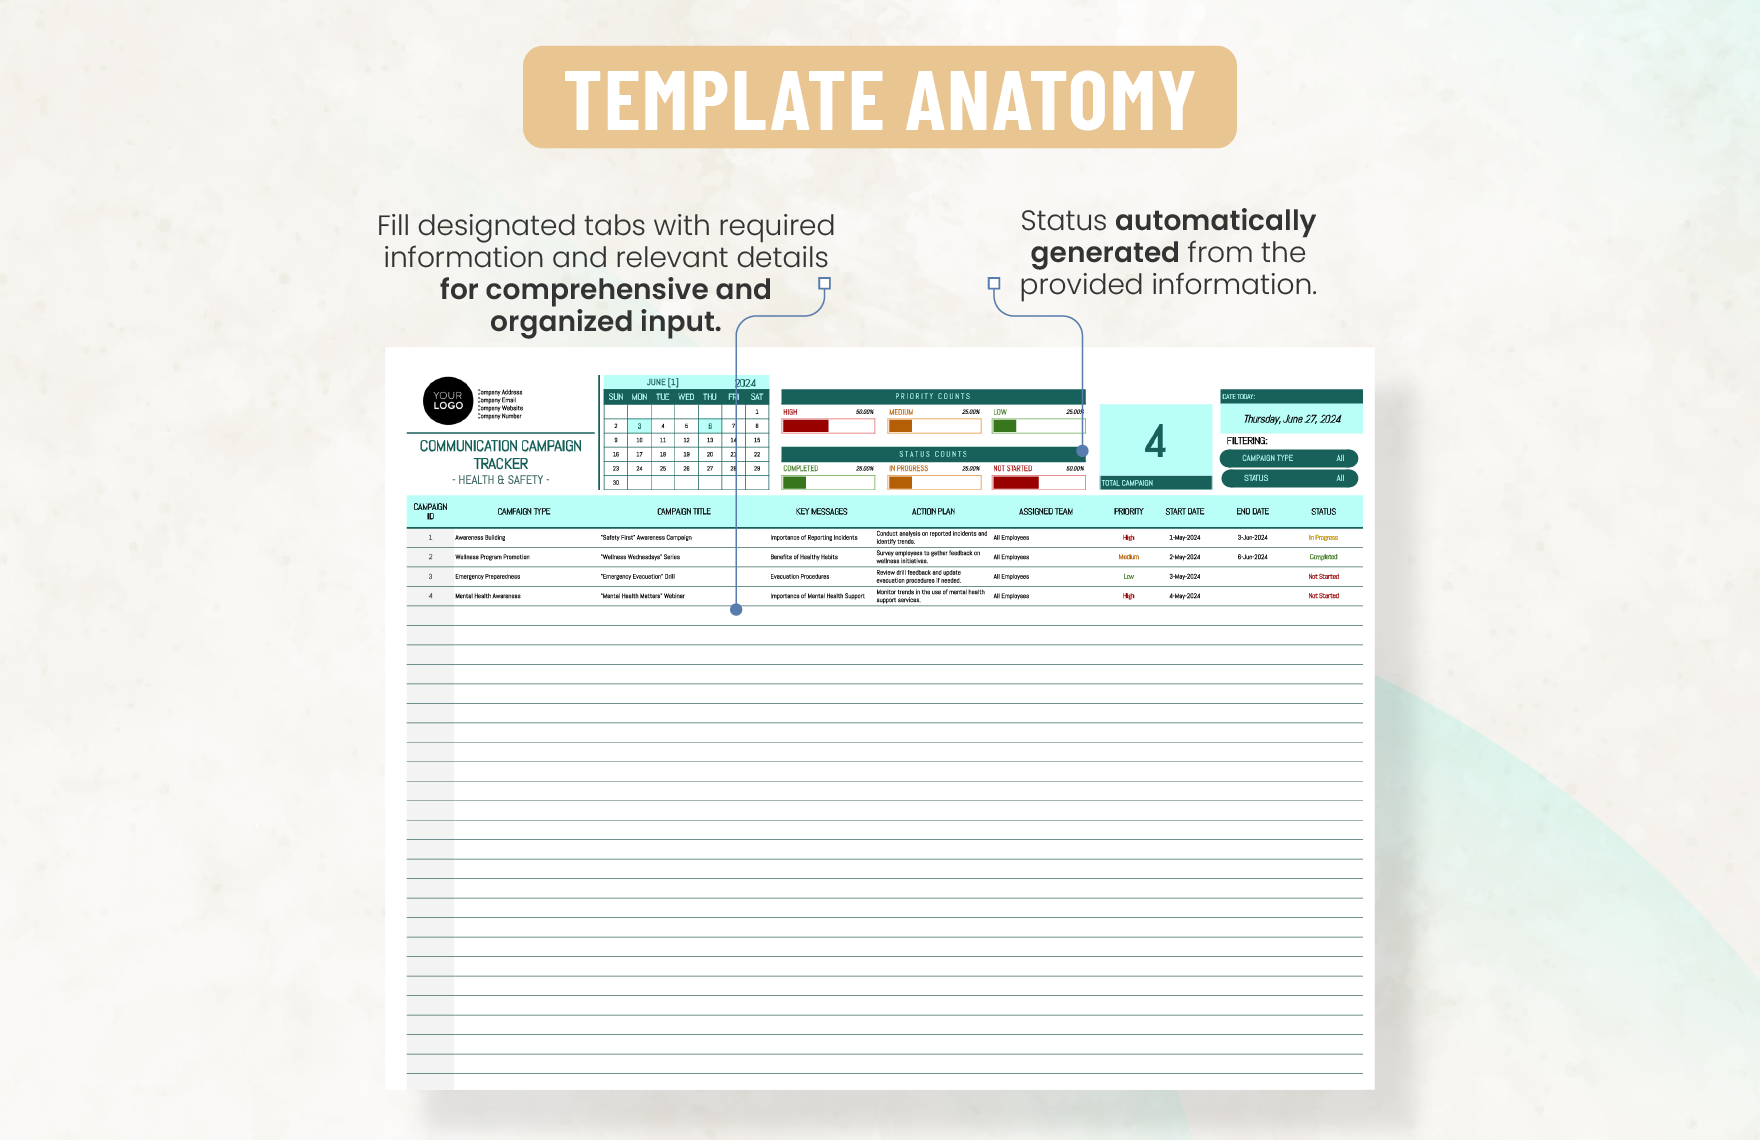 Health & Safety Communication Campaign Tracker Template